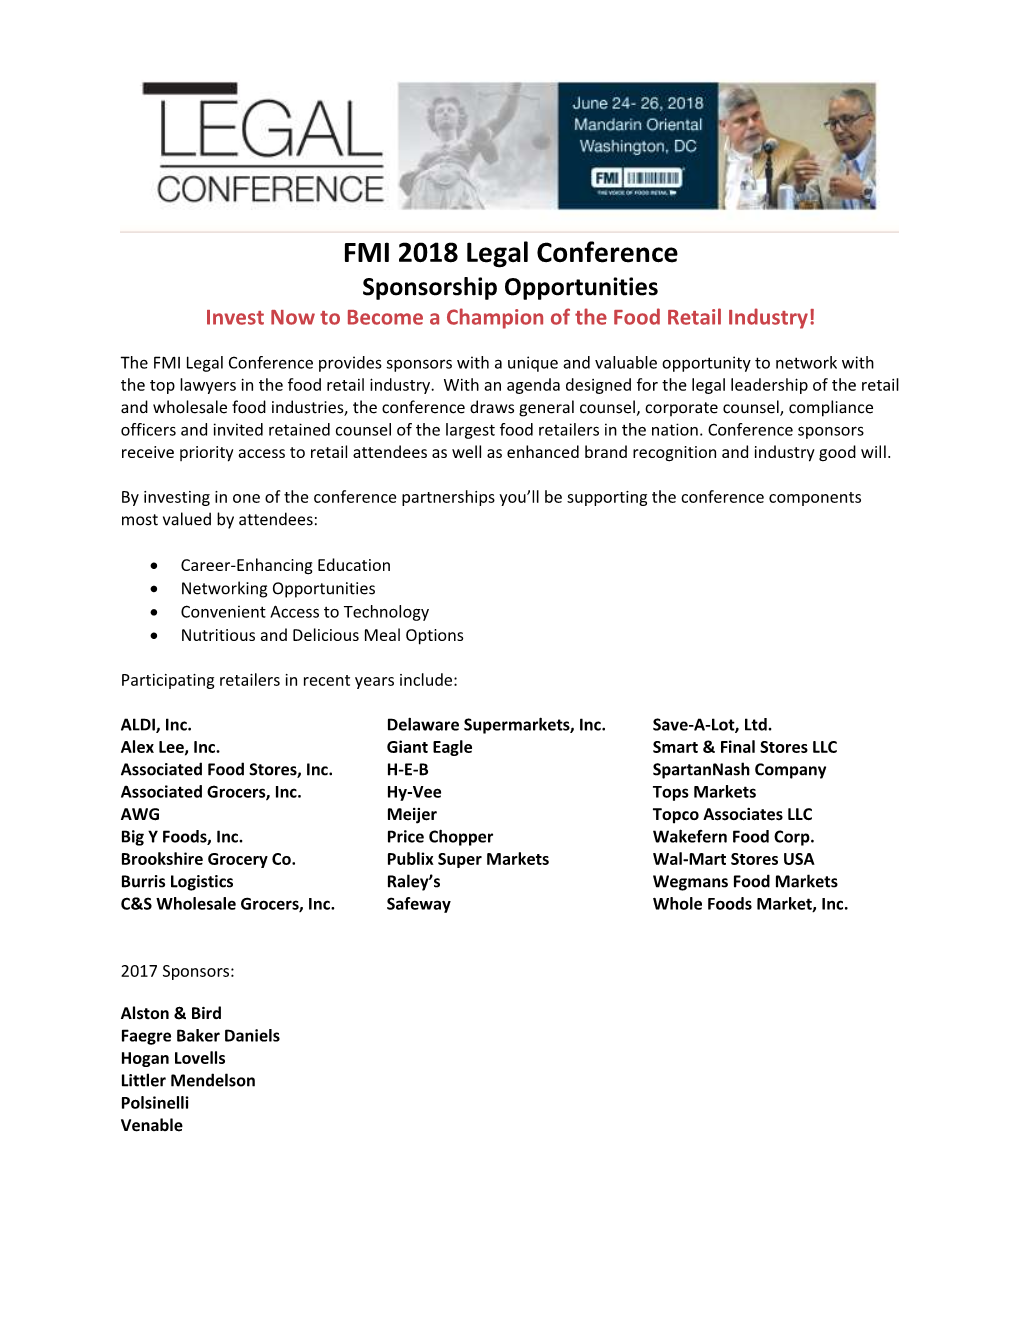 FMI 2018 Legal Conference Sponsorship Opportunities Invest Now to Become a Champion of the Food Retail Industry!